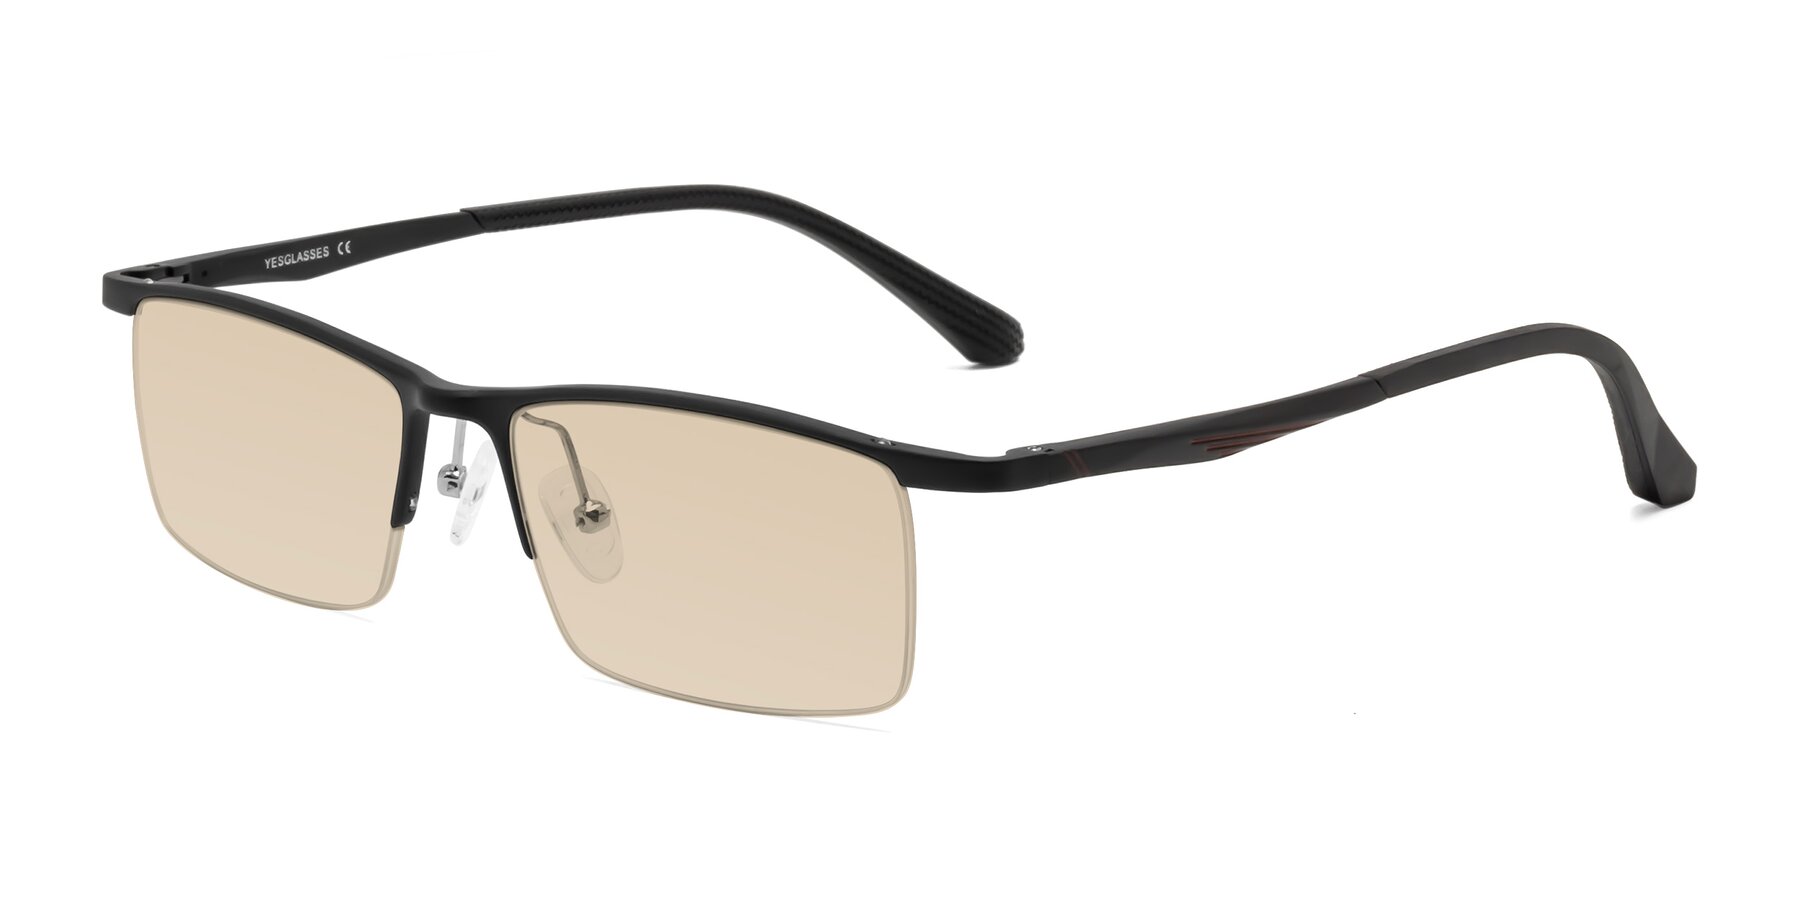 Angle of CX6236 in Black with Light Brown Tinted Lenses